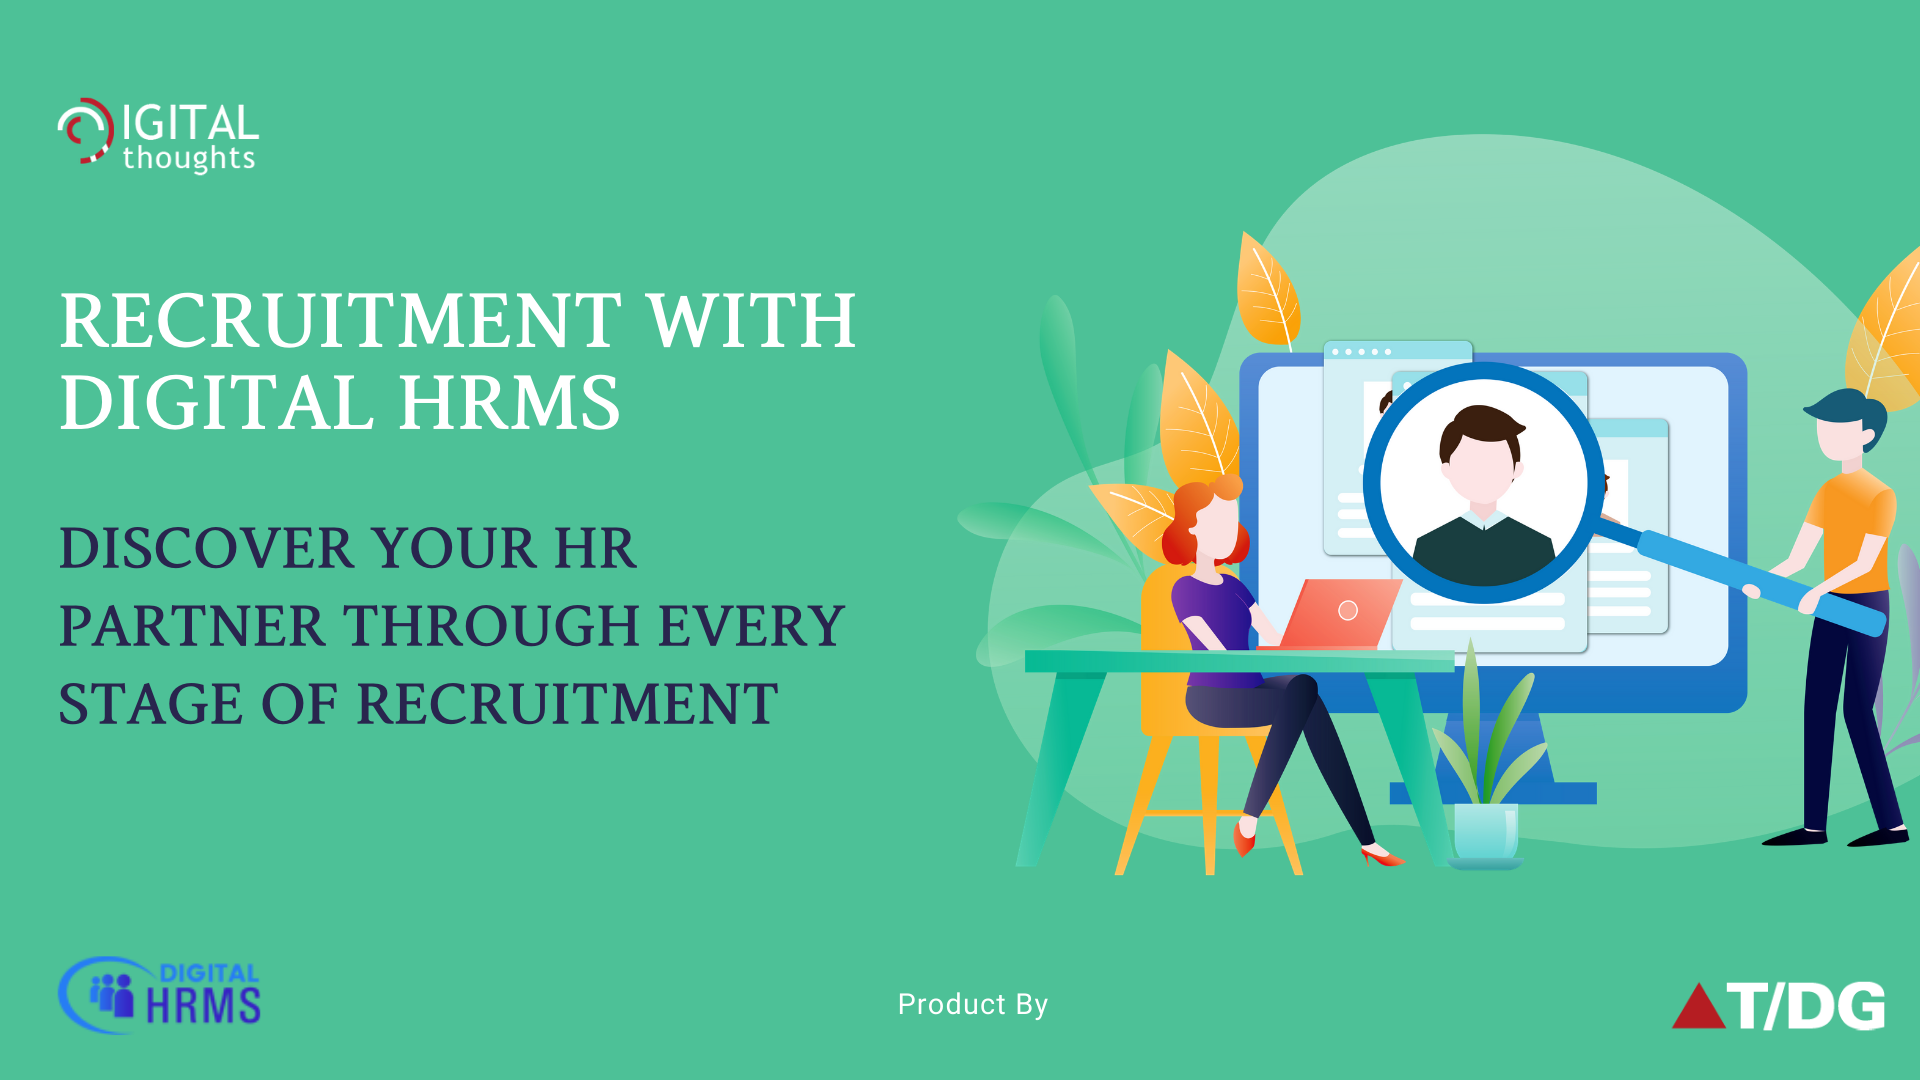 Recruitment with Digital HRMS: Discover Your HR Partner through the 5 Stages of Hiring